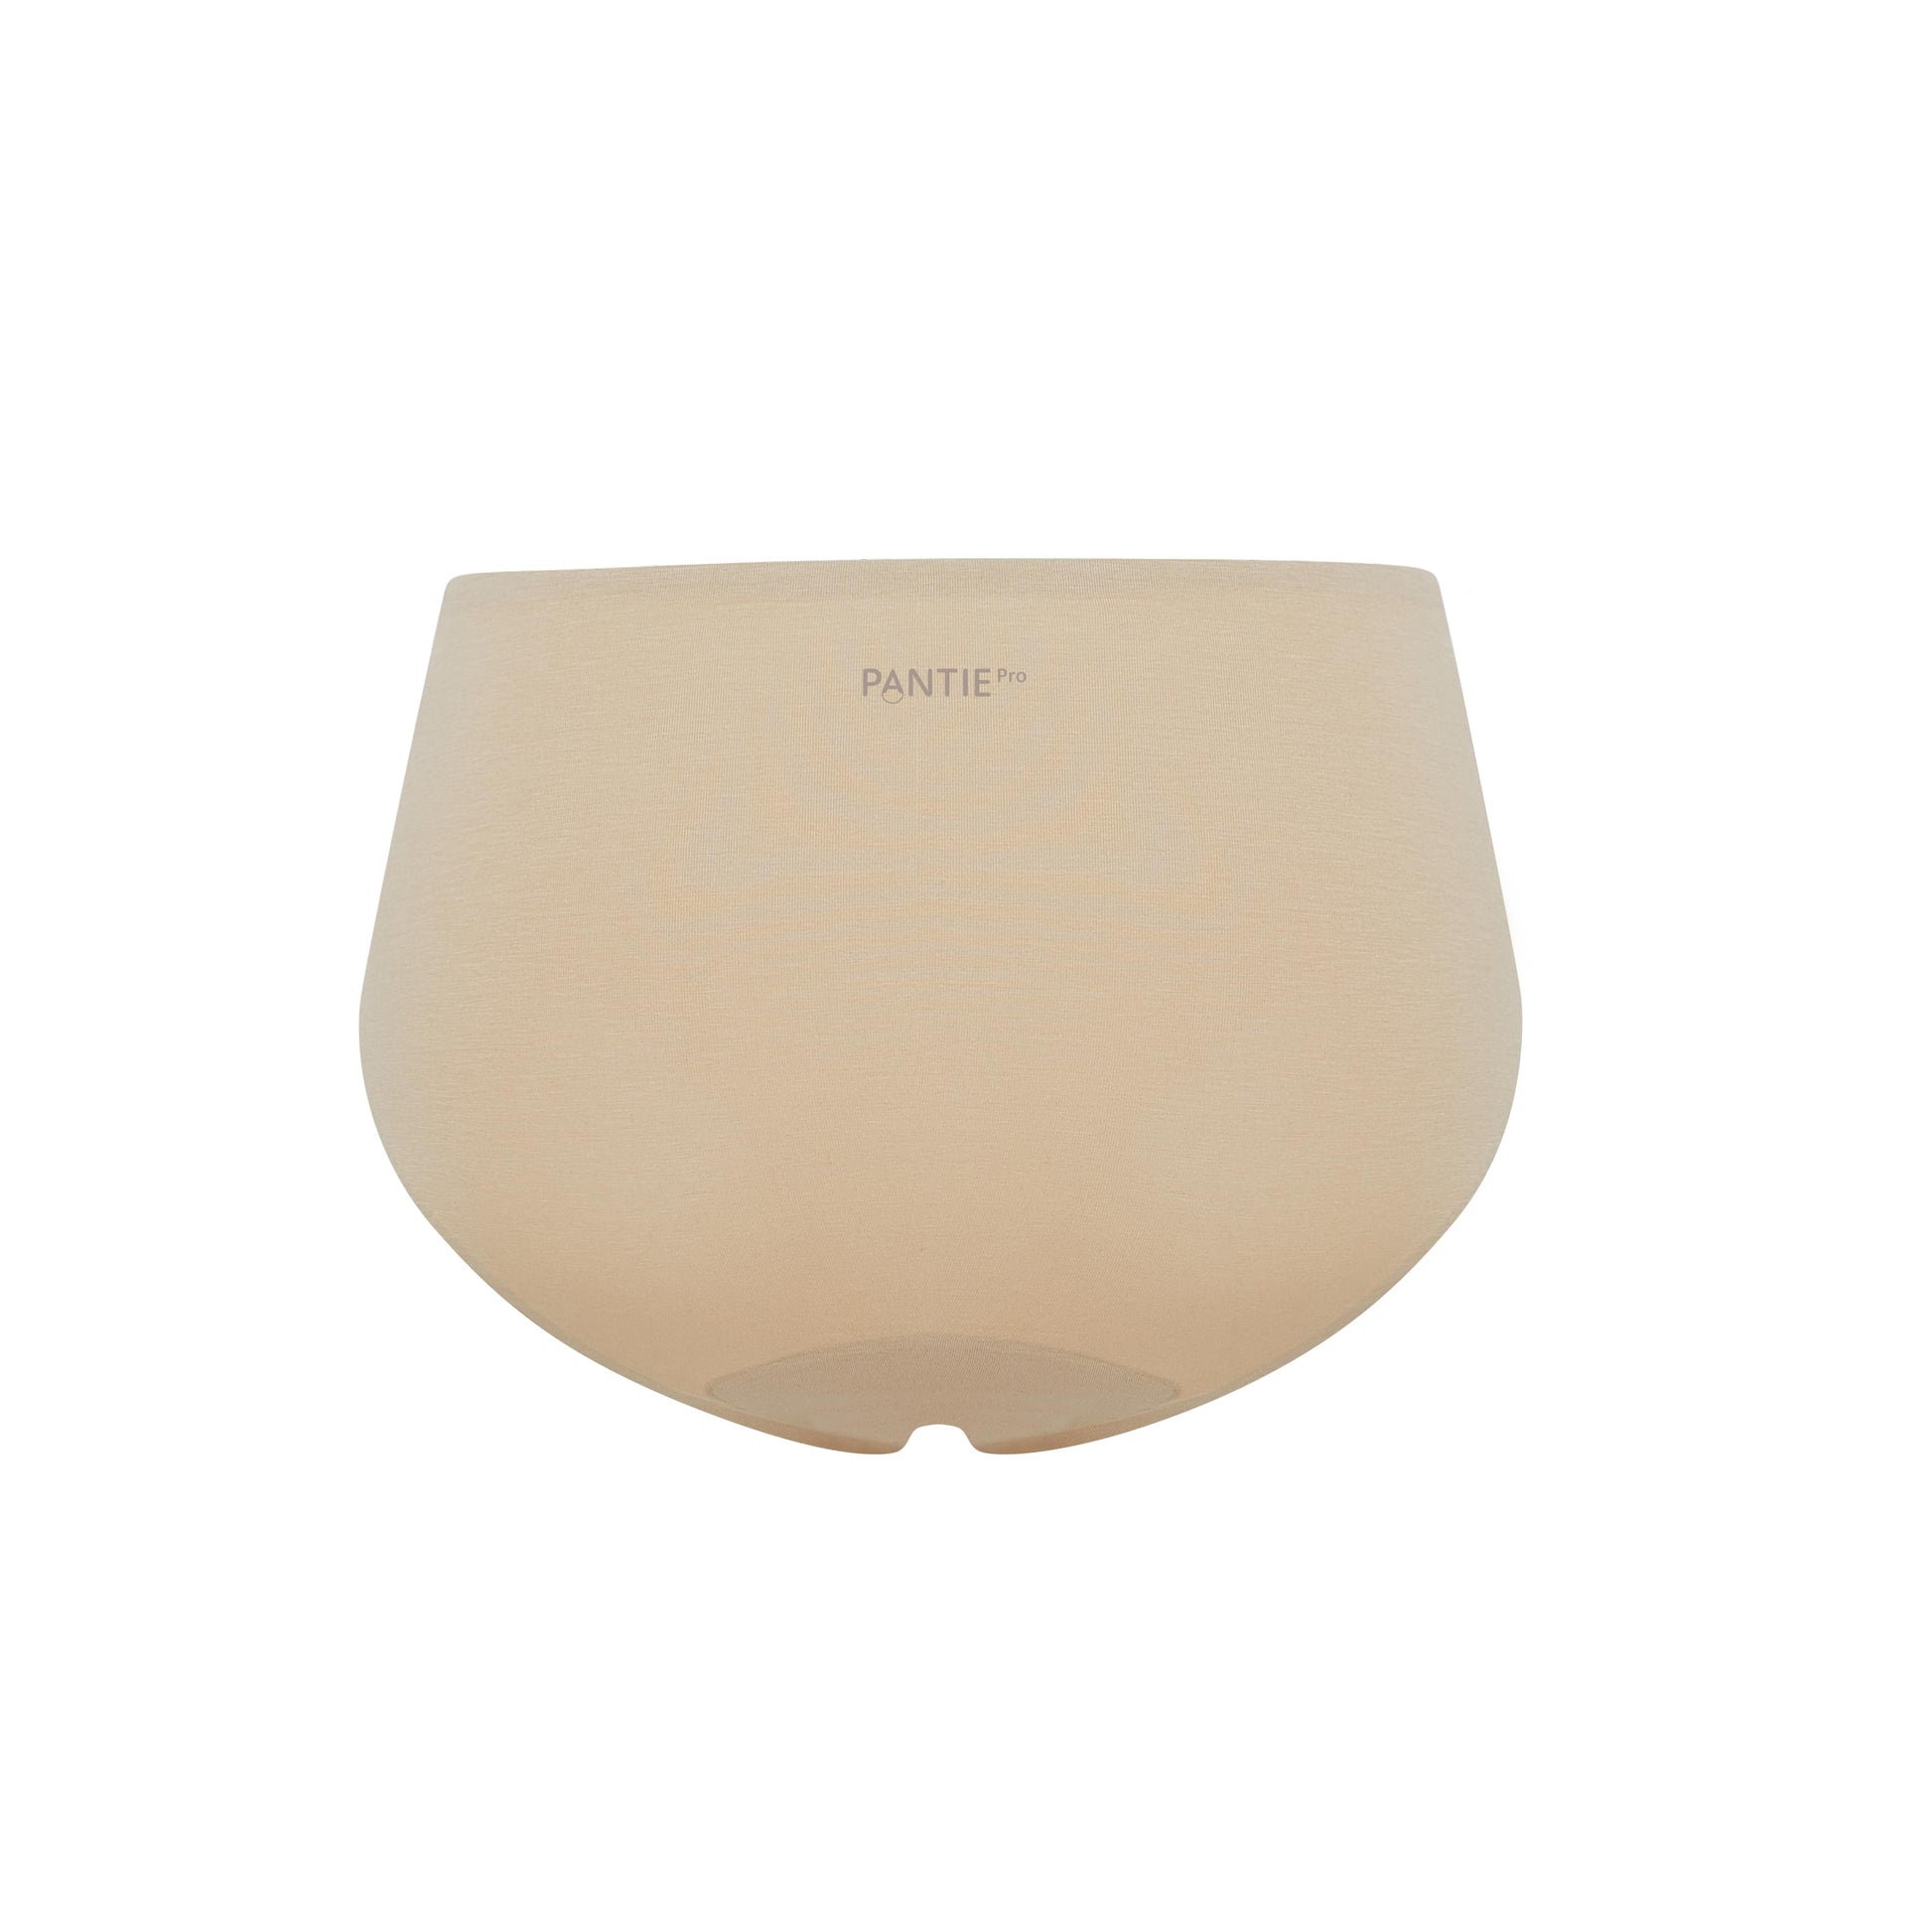 a nude mid waist period brief from back